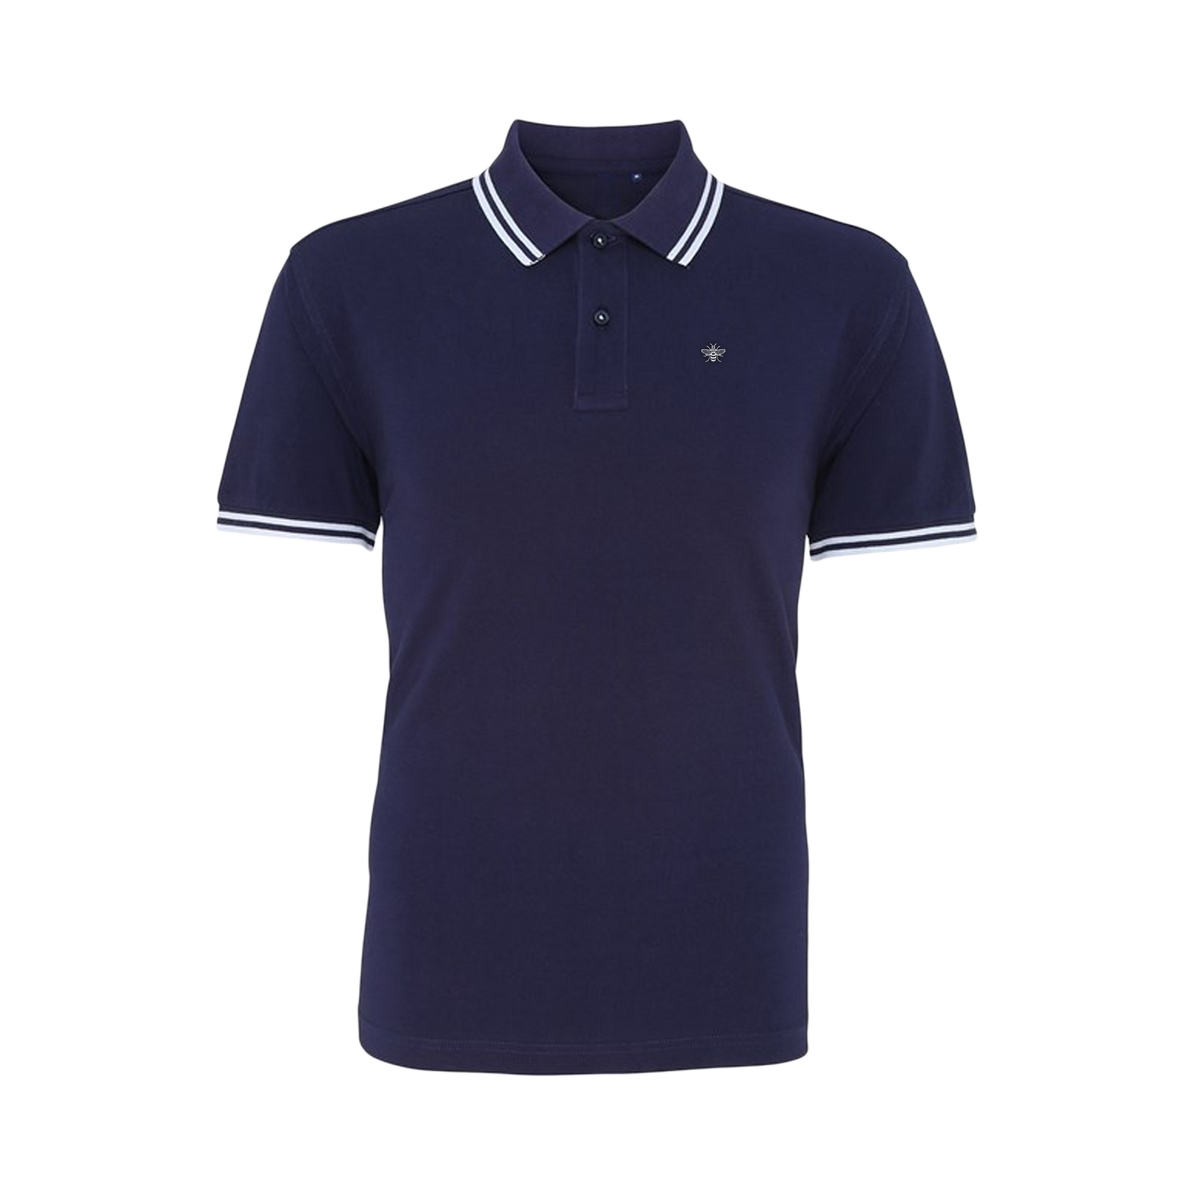 BeeManc Embroidered Bee Tipped Polo -  Navy/White